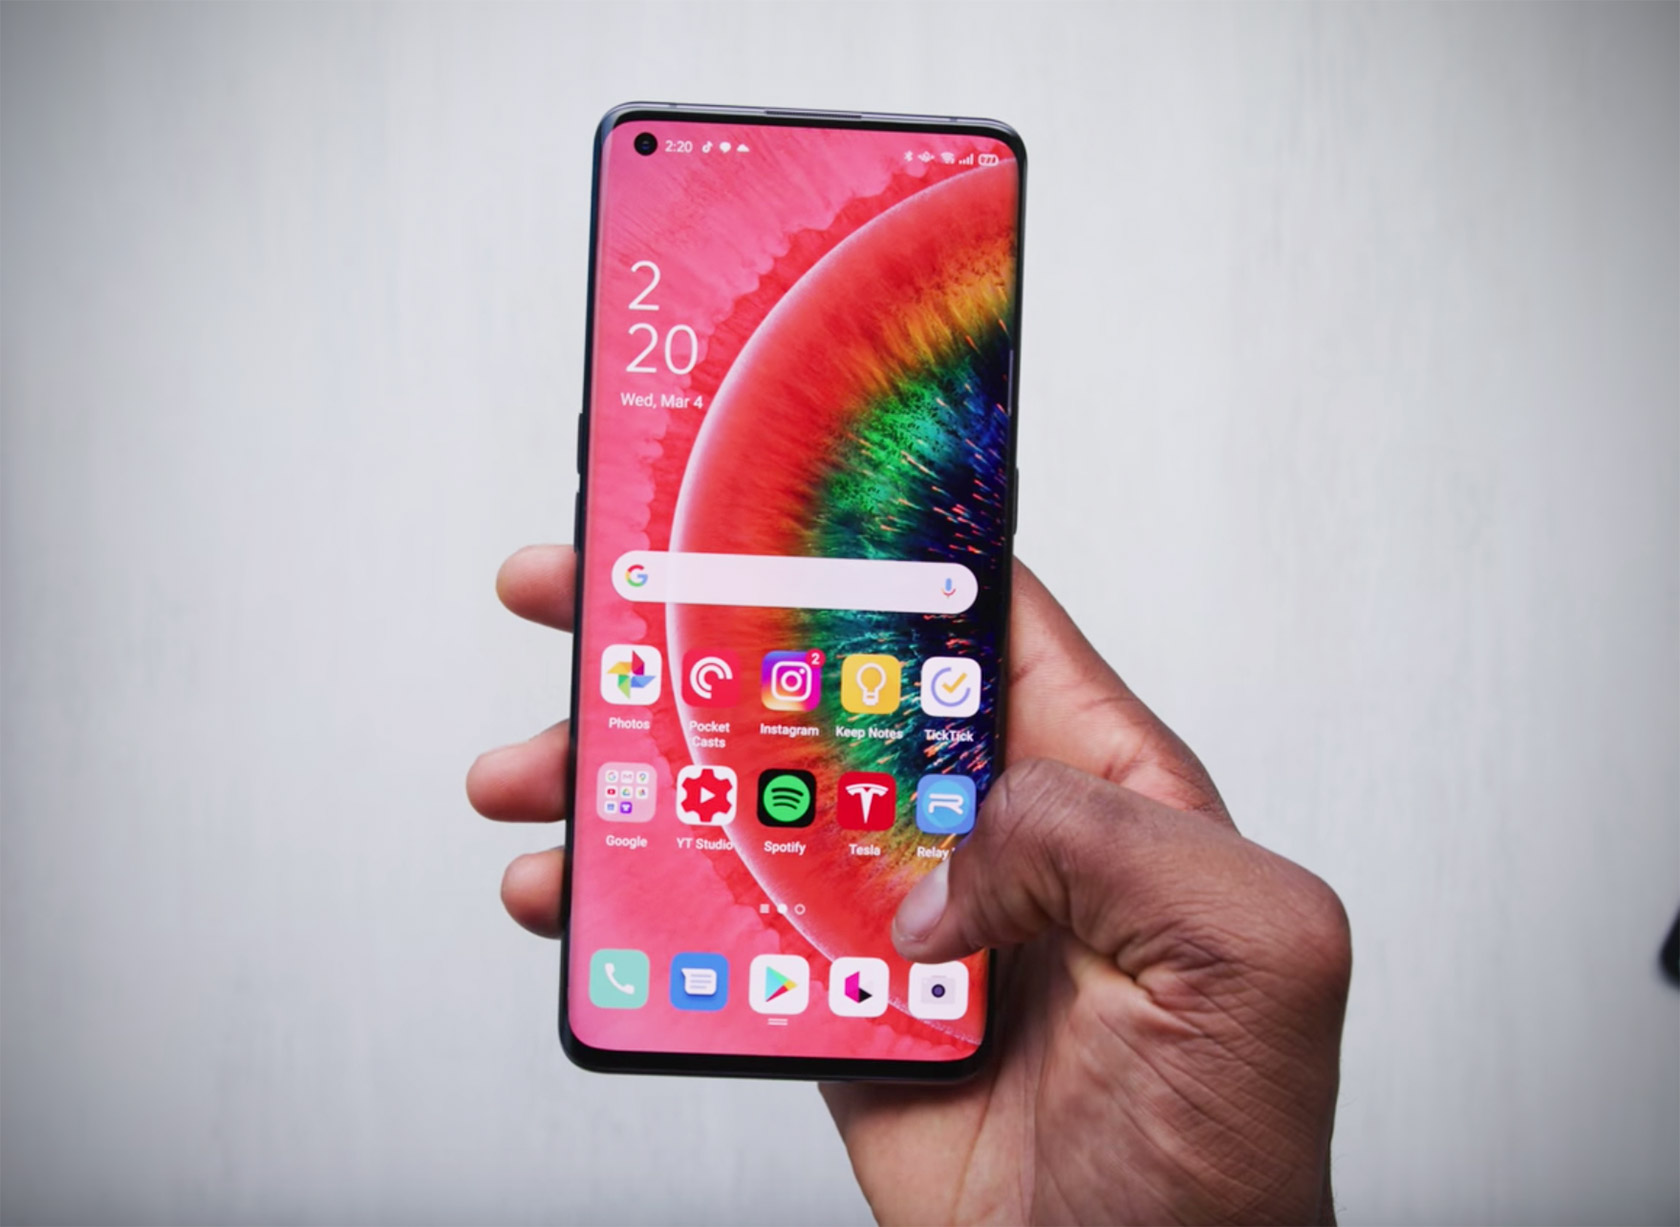 Hands-On with the OPPO Find X2 Pro Smartphone - The Flighter